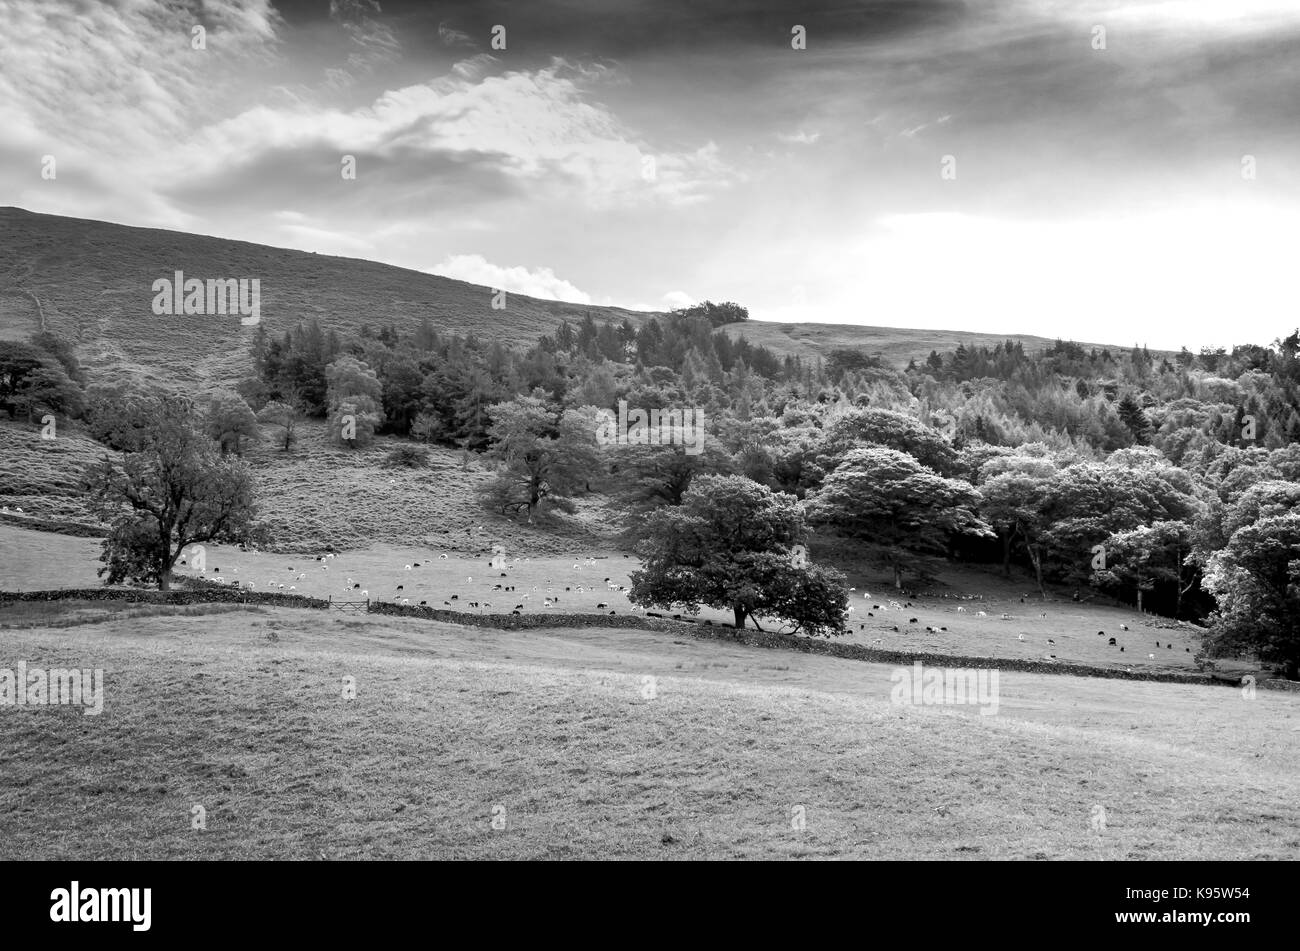 Farm animals in the English countryside of the Lake District in black and white Stock Photo